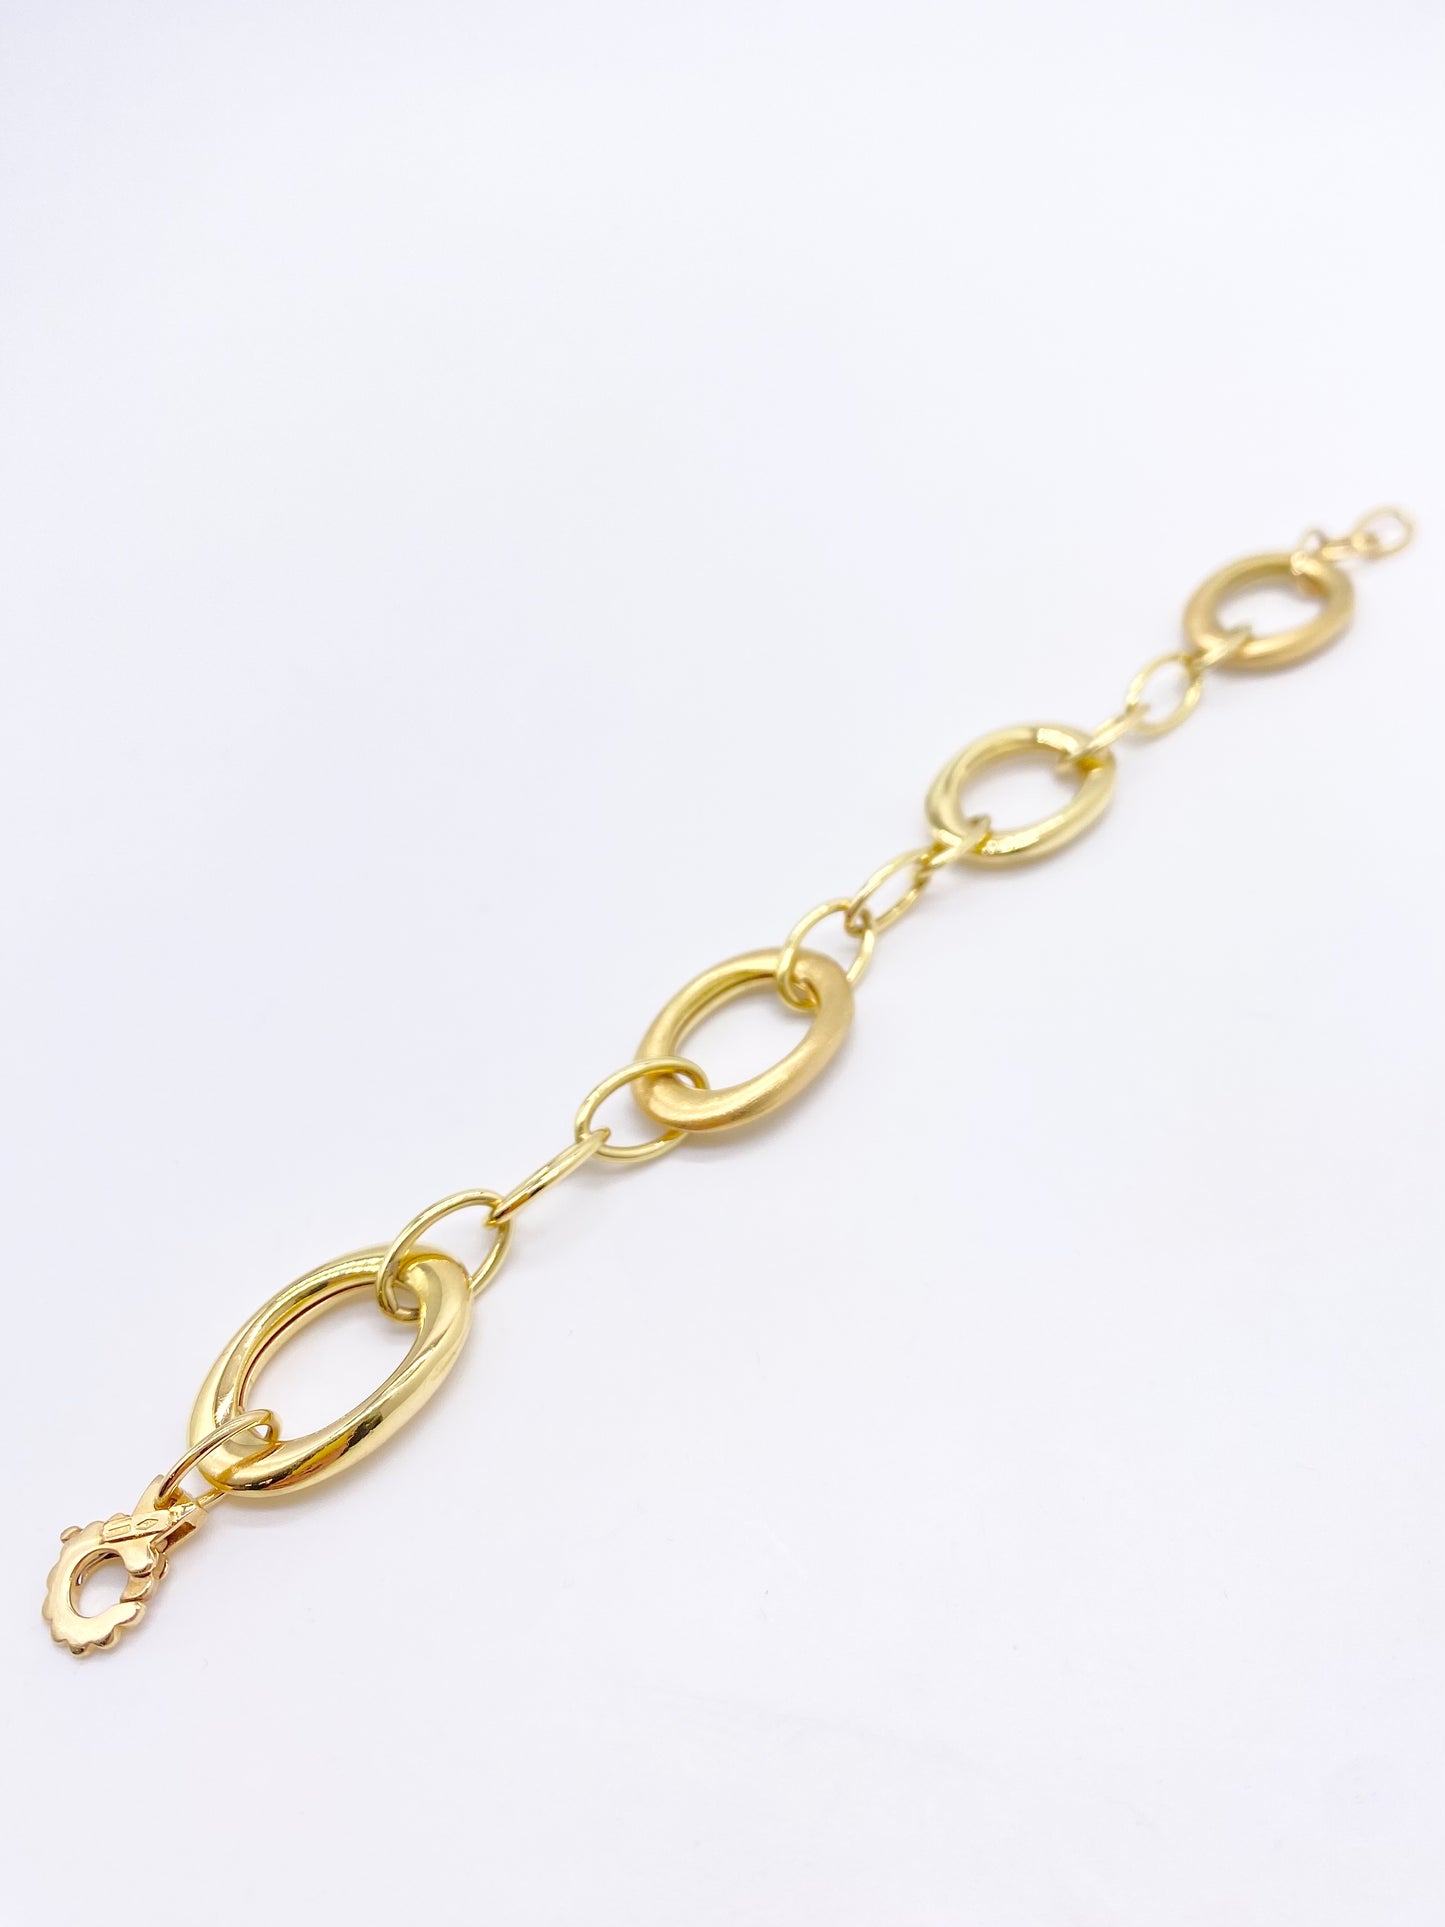 Yellow gold bracelet with ovals